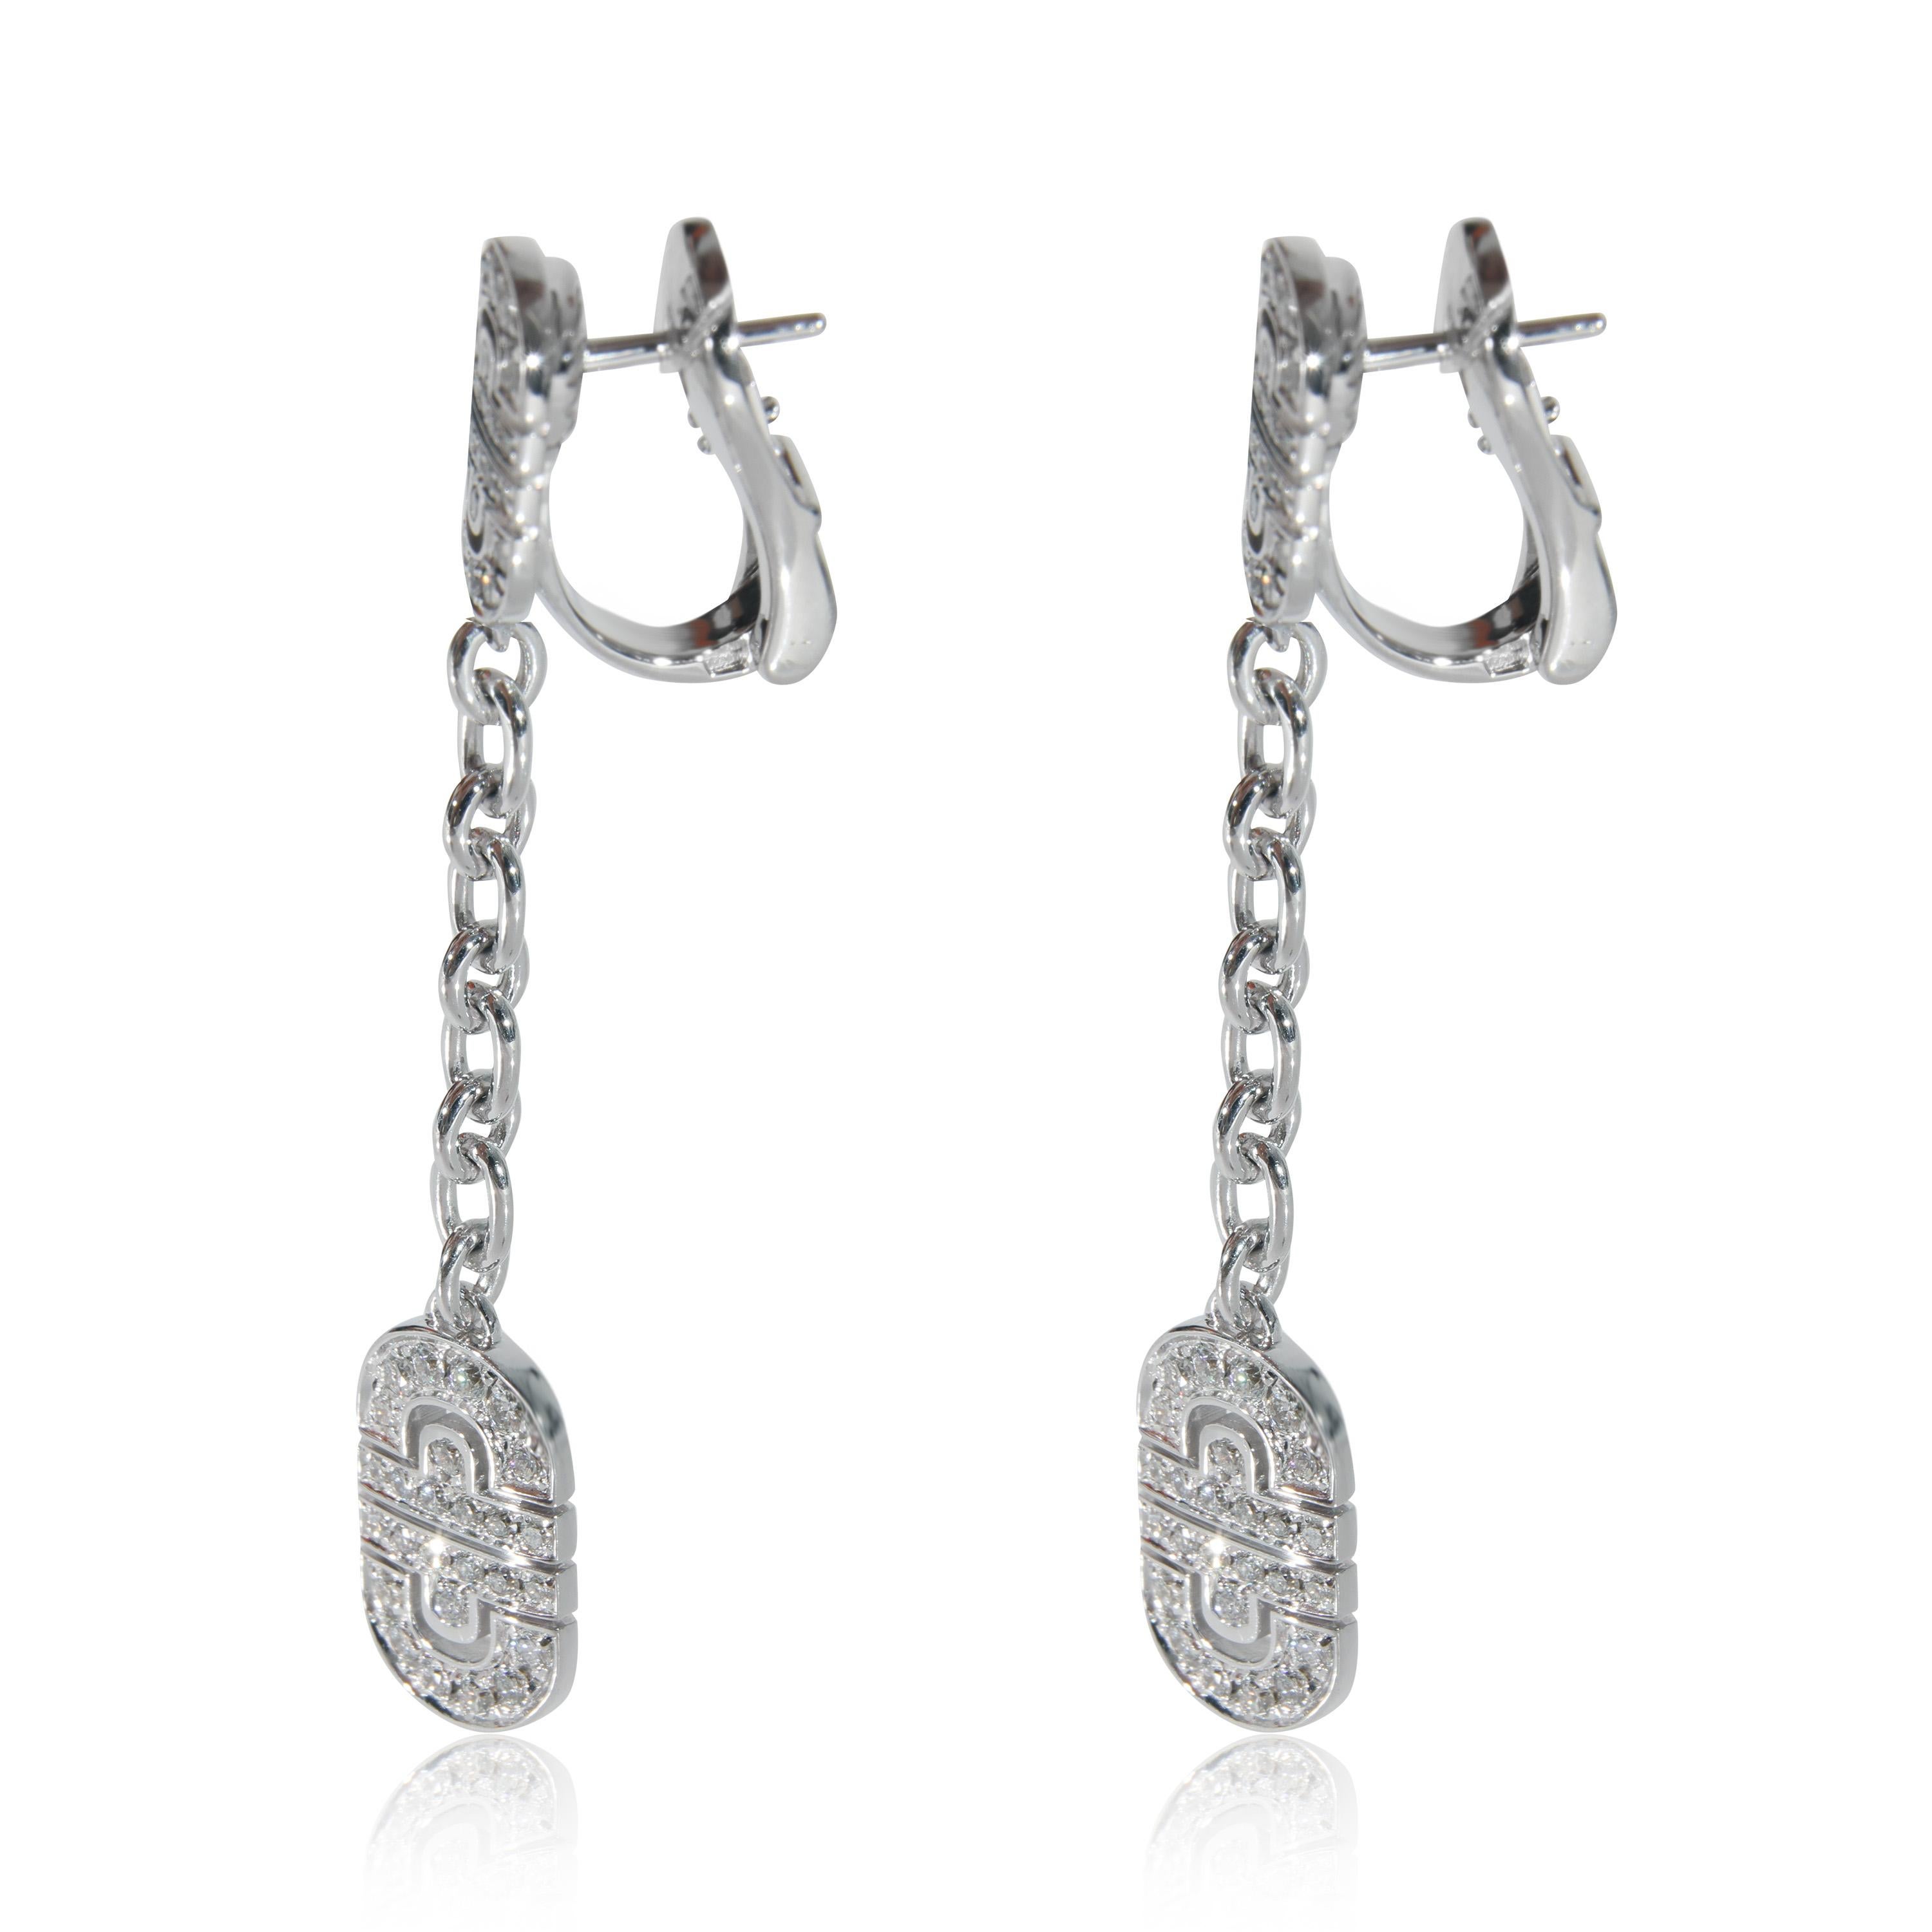 BVLGARI Parentesi Diamond Earrings in 18k White Gold 1.15 CTW In Excellent Condition For Sale In New York, NY